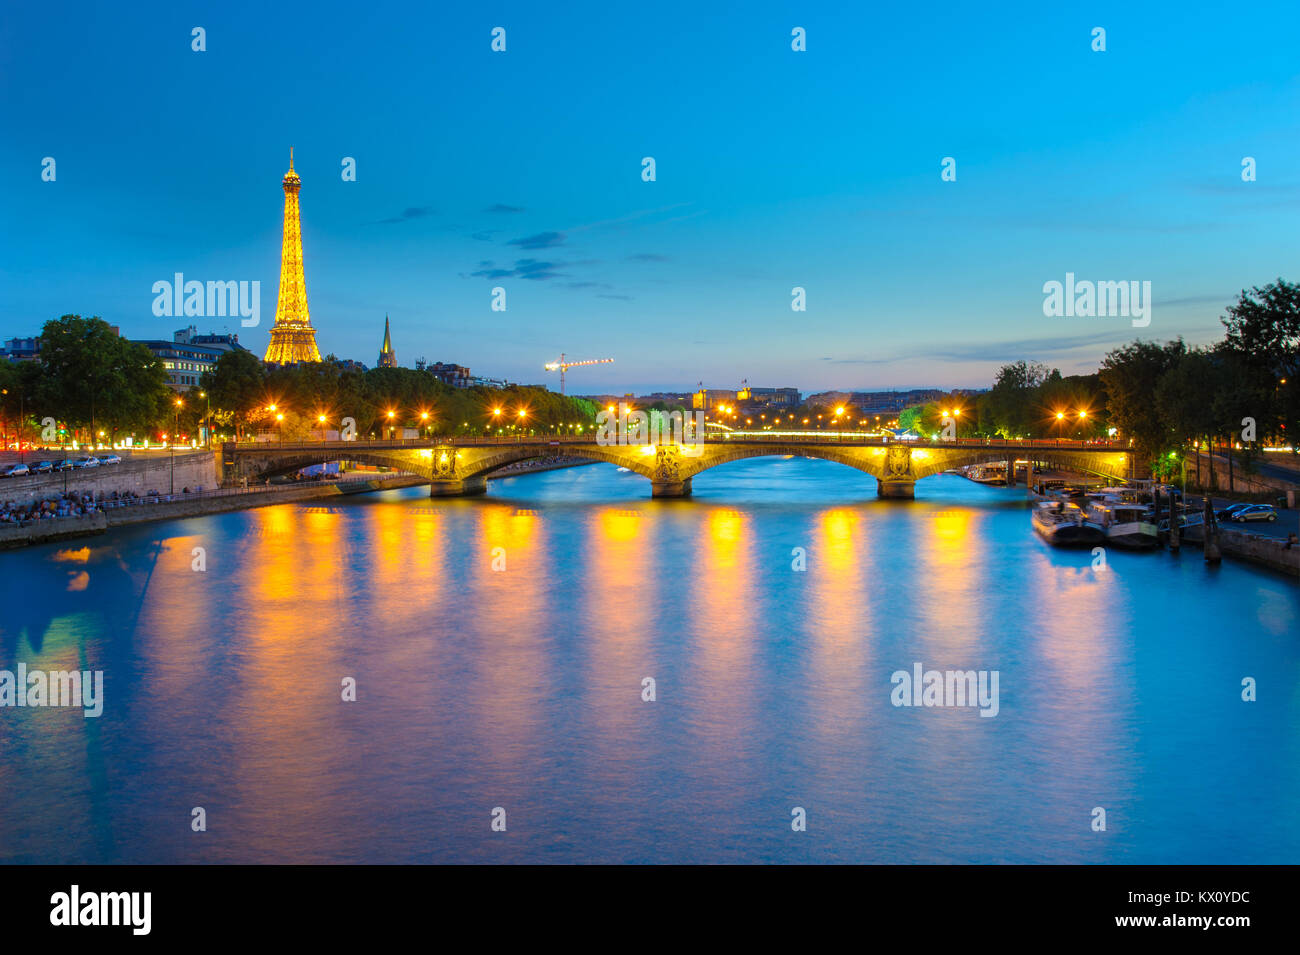 Night view of Eiffel Tower and Pont des invalides in Paris Stock Photo